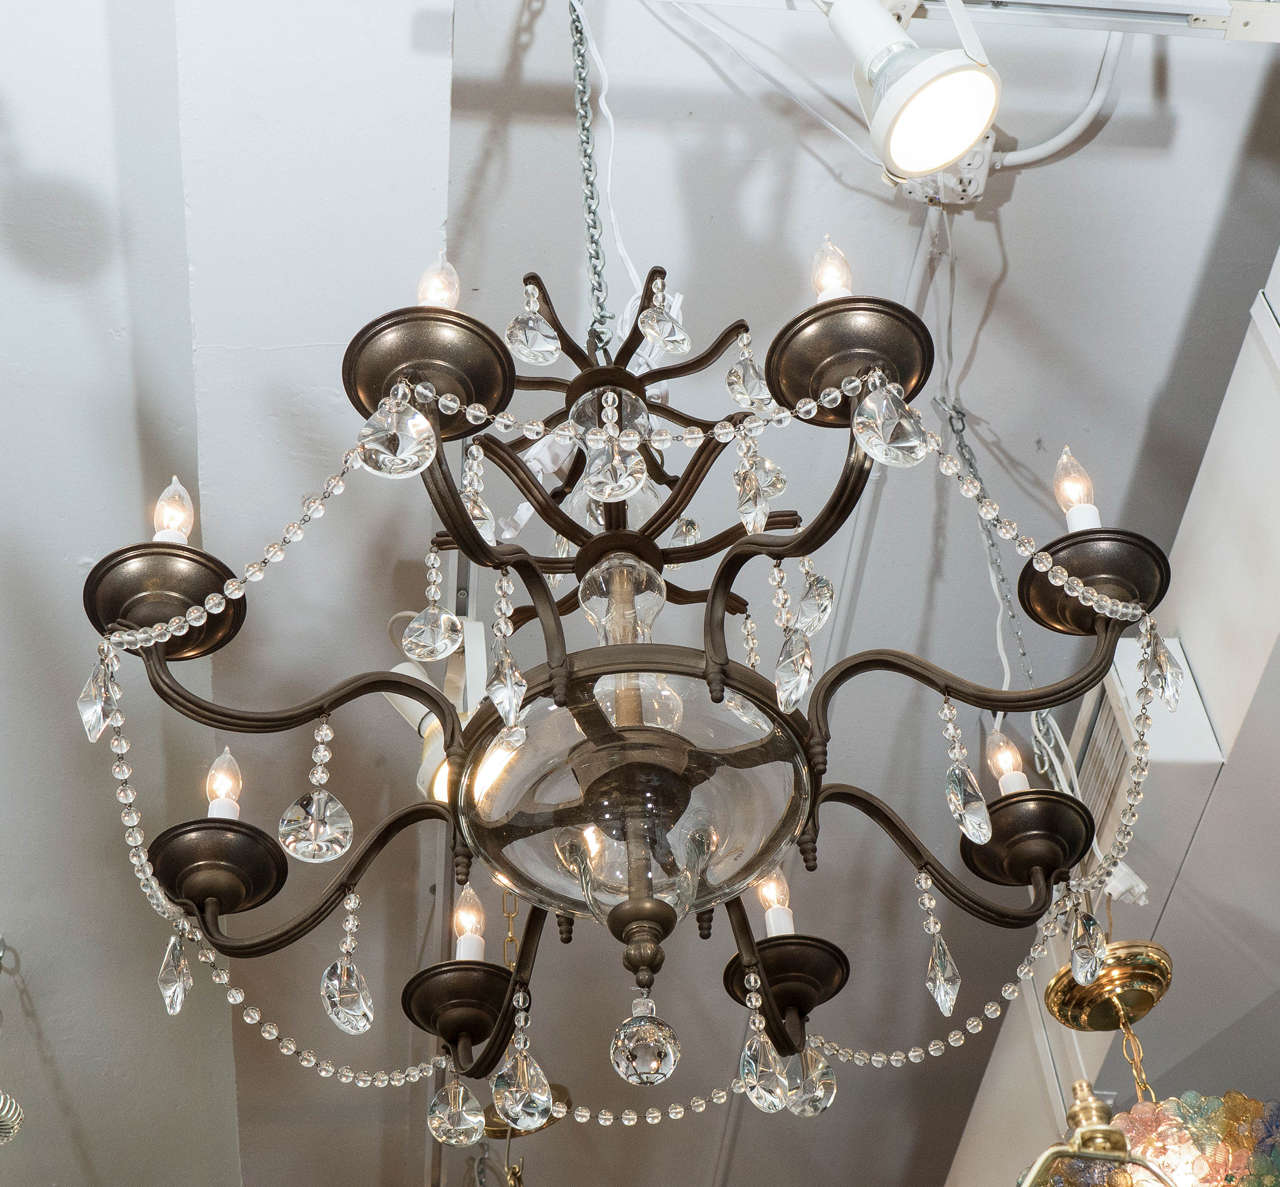 A vintage chandelier with iron frame, trimmed with Sciolari crystals, with central rod, surrounded by two baluster form glass bulbs, beset by two levels of extending, curved beams, each with beading and drops, suspending eight scroll arms, each with